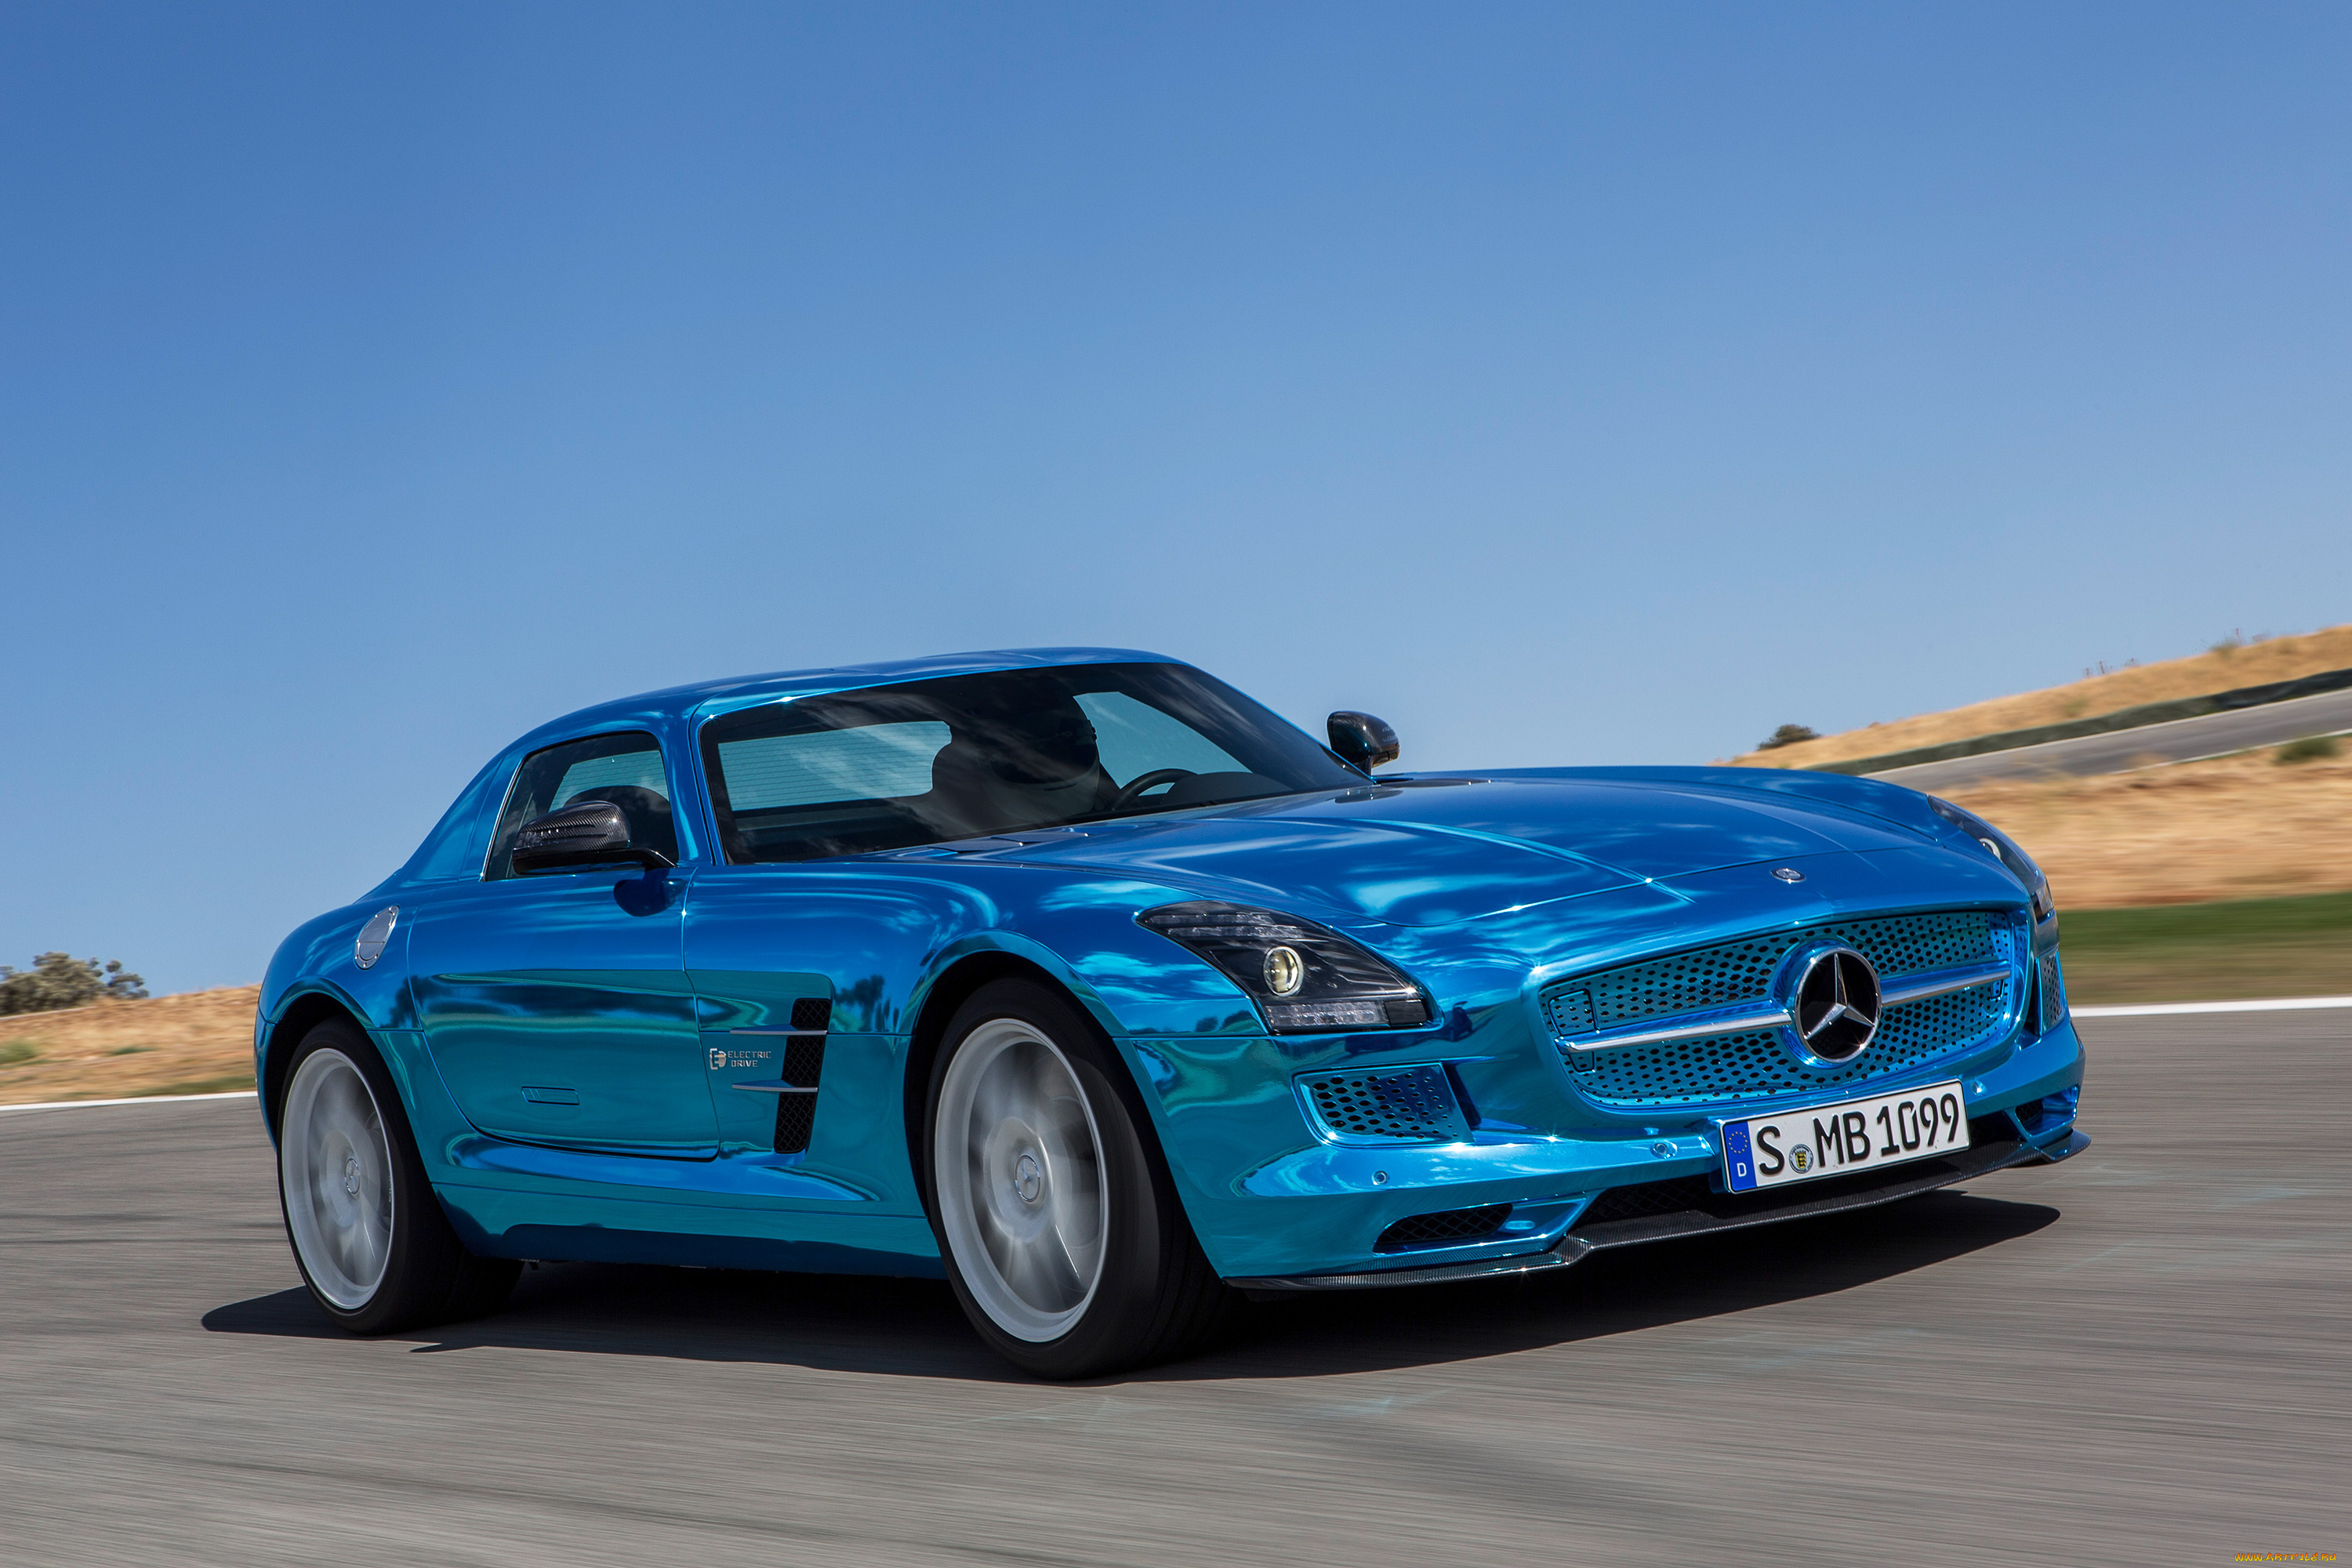 mercedes-benz, sls, amg, coupe, electric, drive, 2014, автомобили, mercedes-benz, amg, sls, 2014, drive, coupe, electric